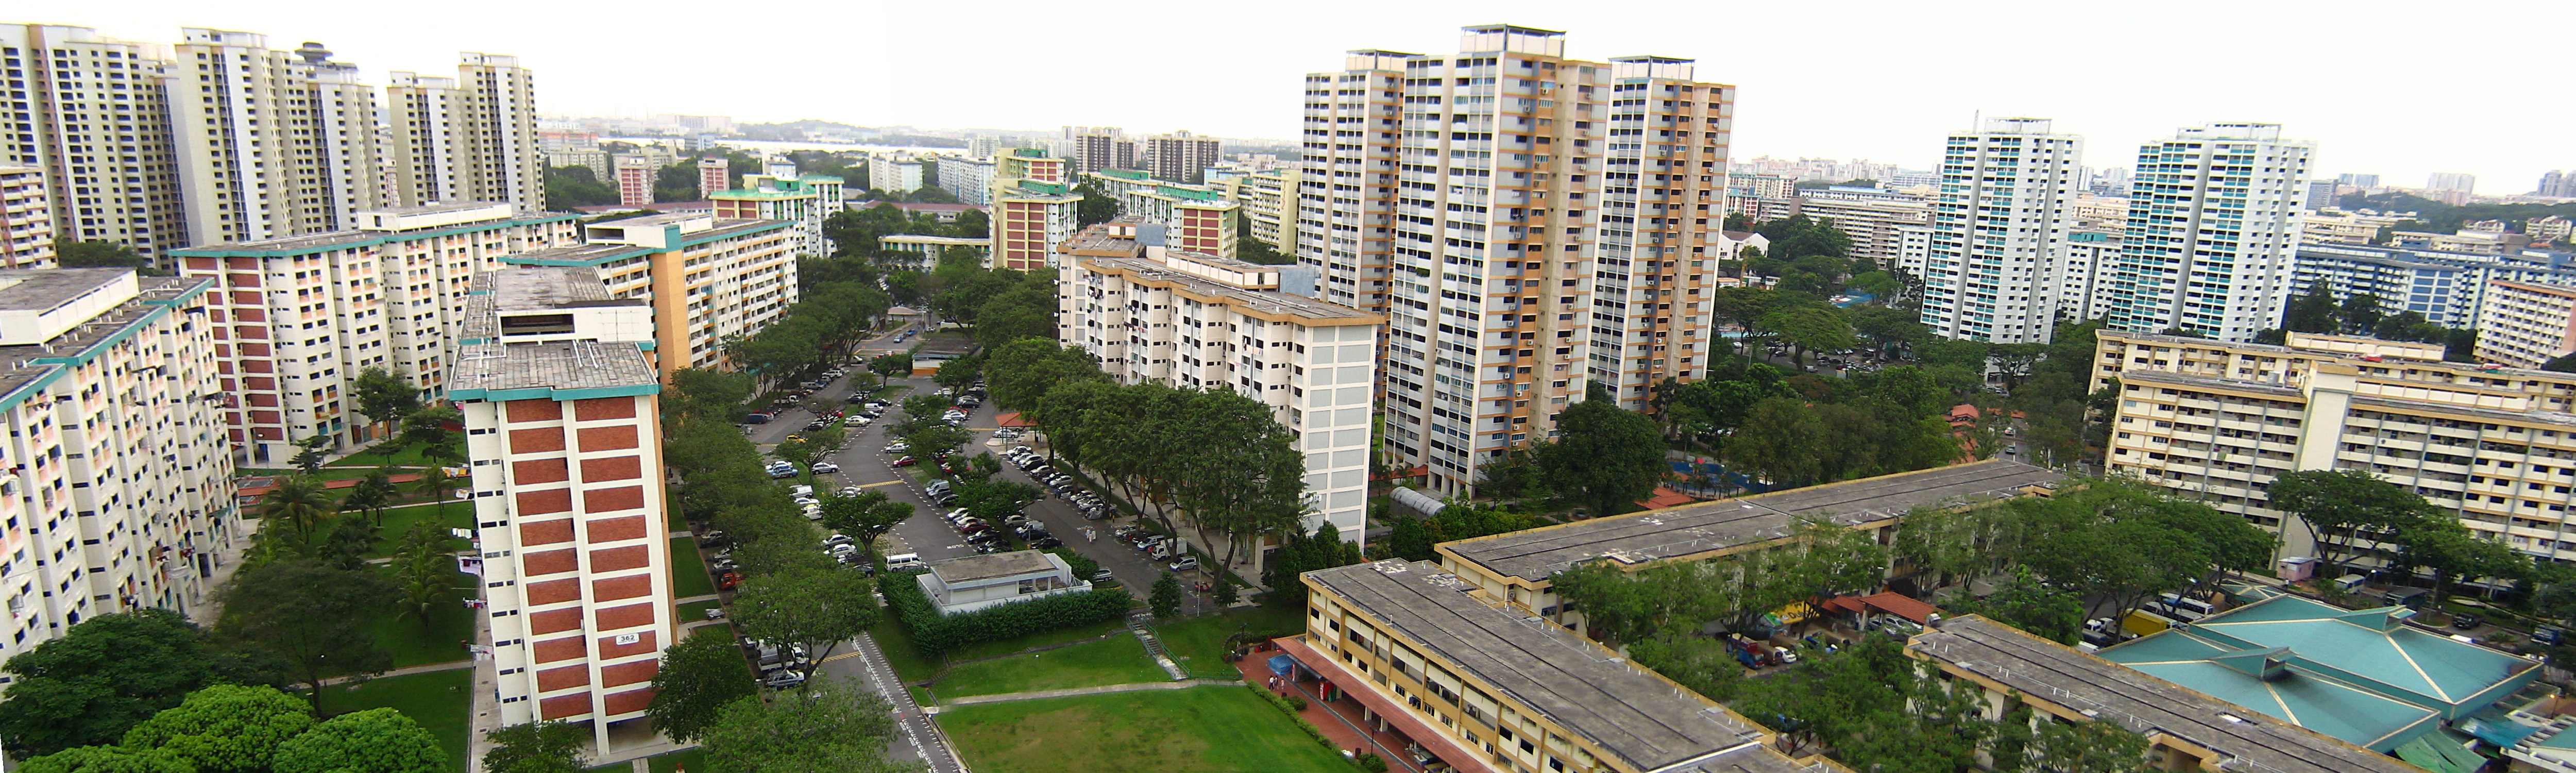 Clementi View